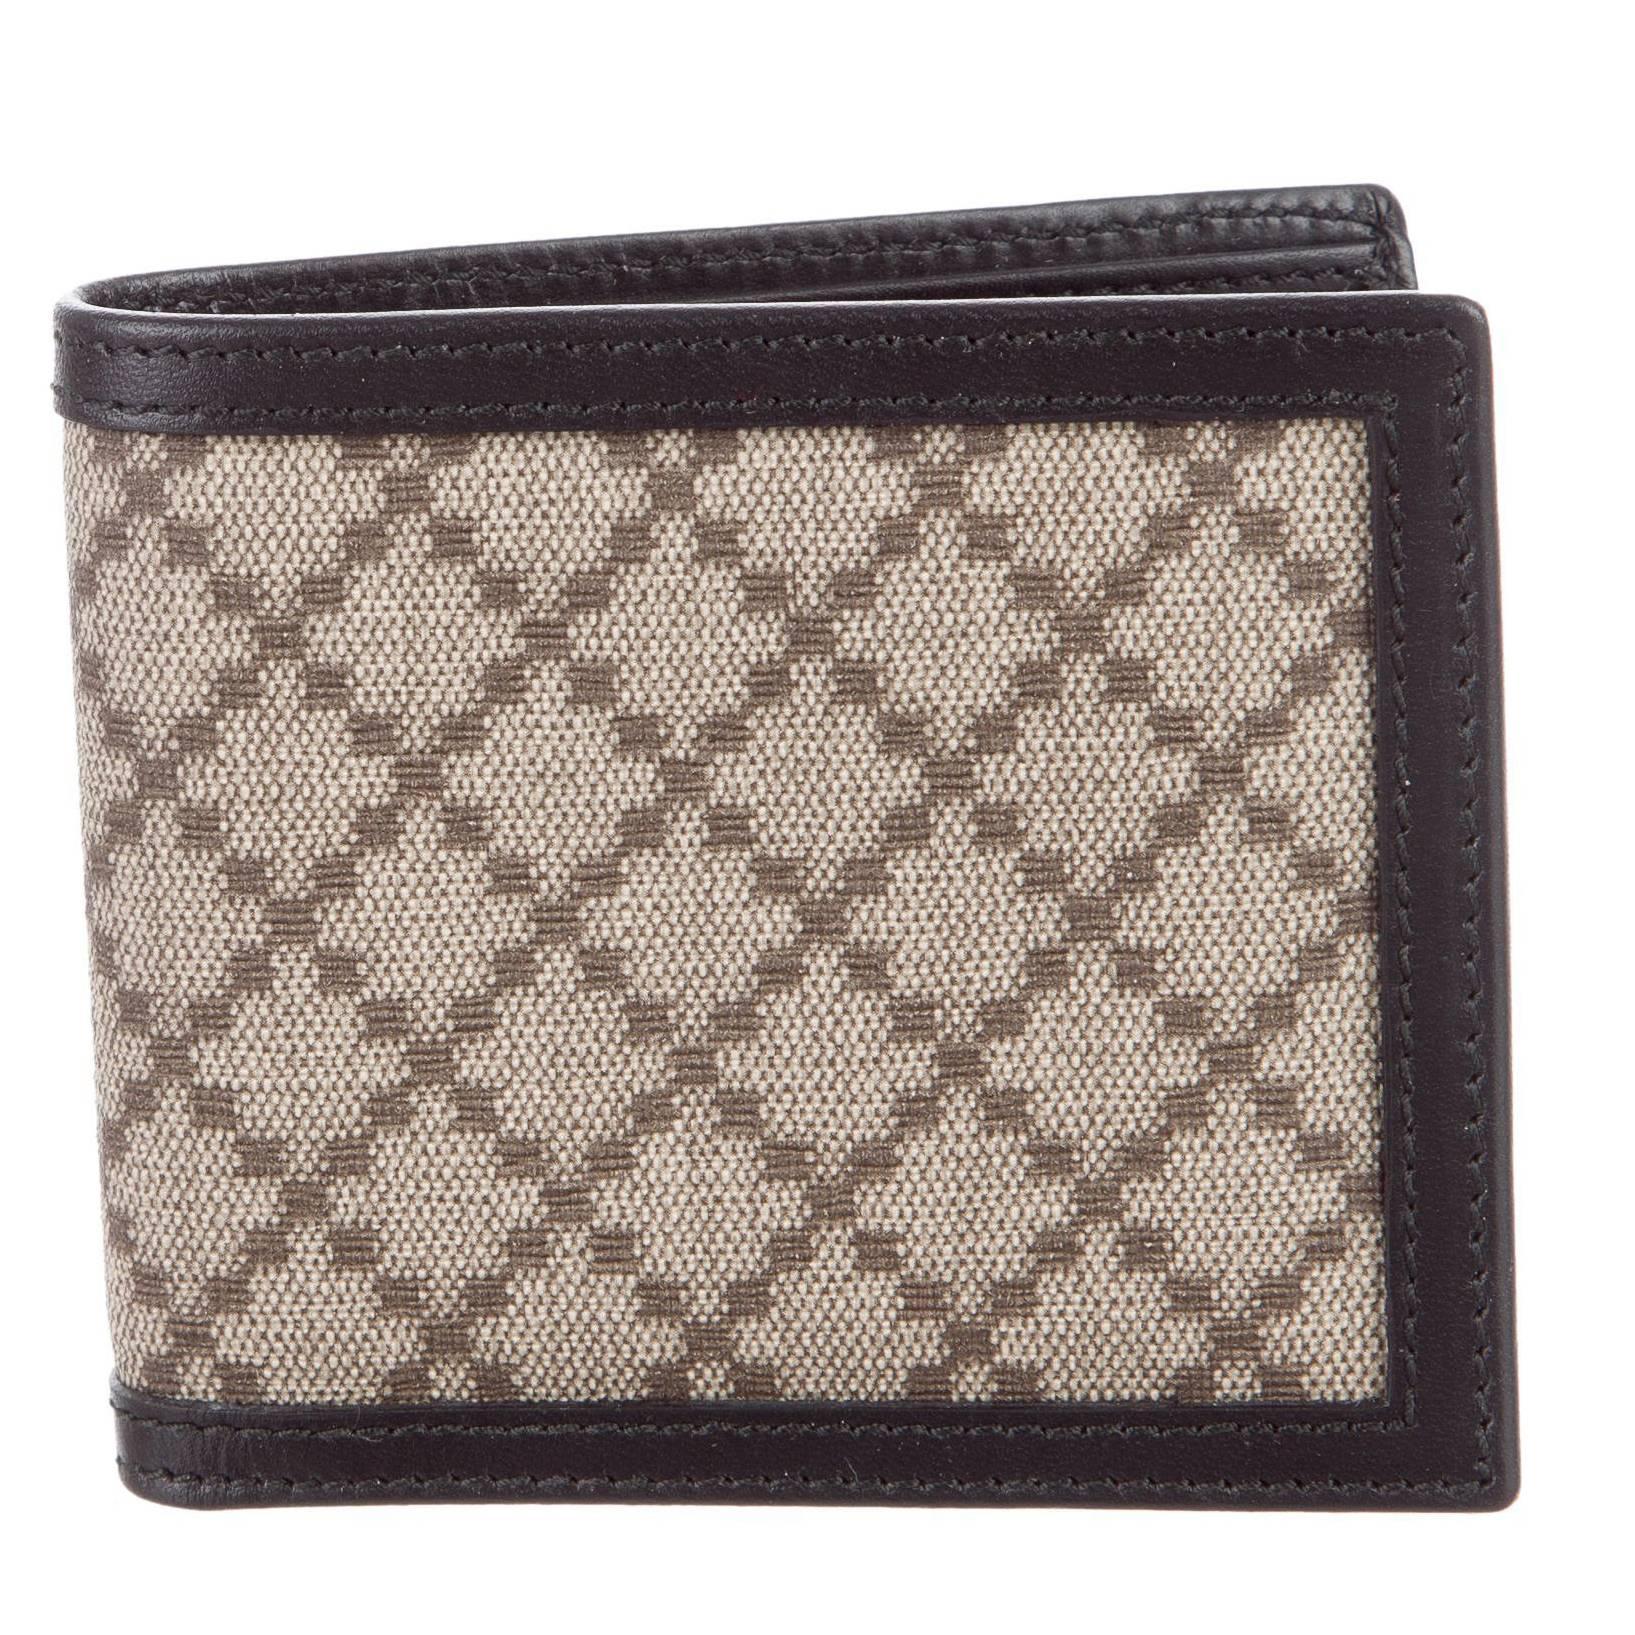 Gucci New Monogram Canvas Leather Men's Bifold Suit Wallet in Box